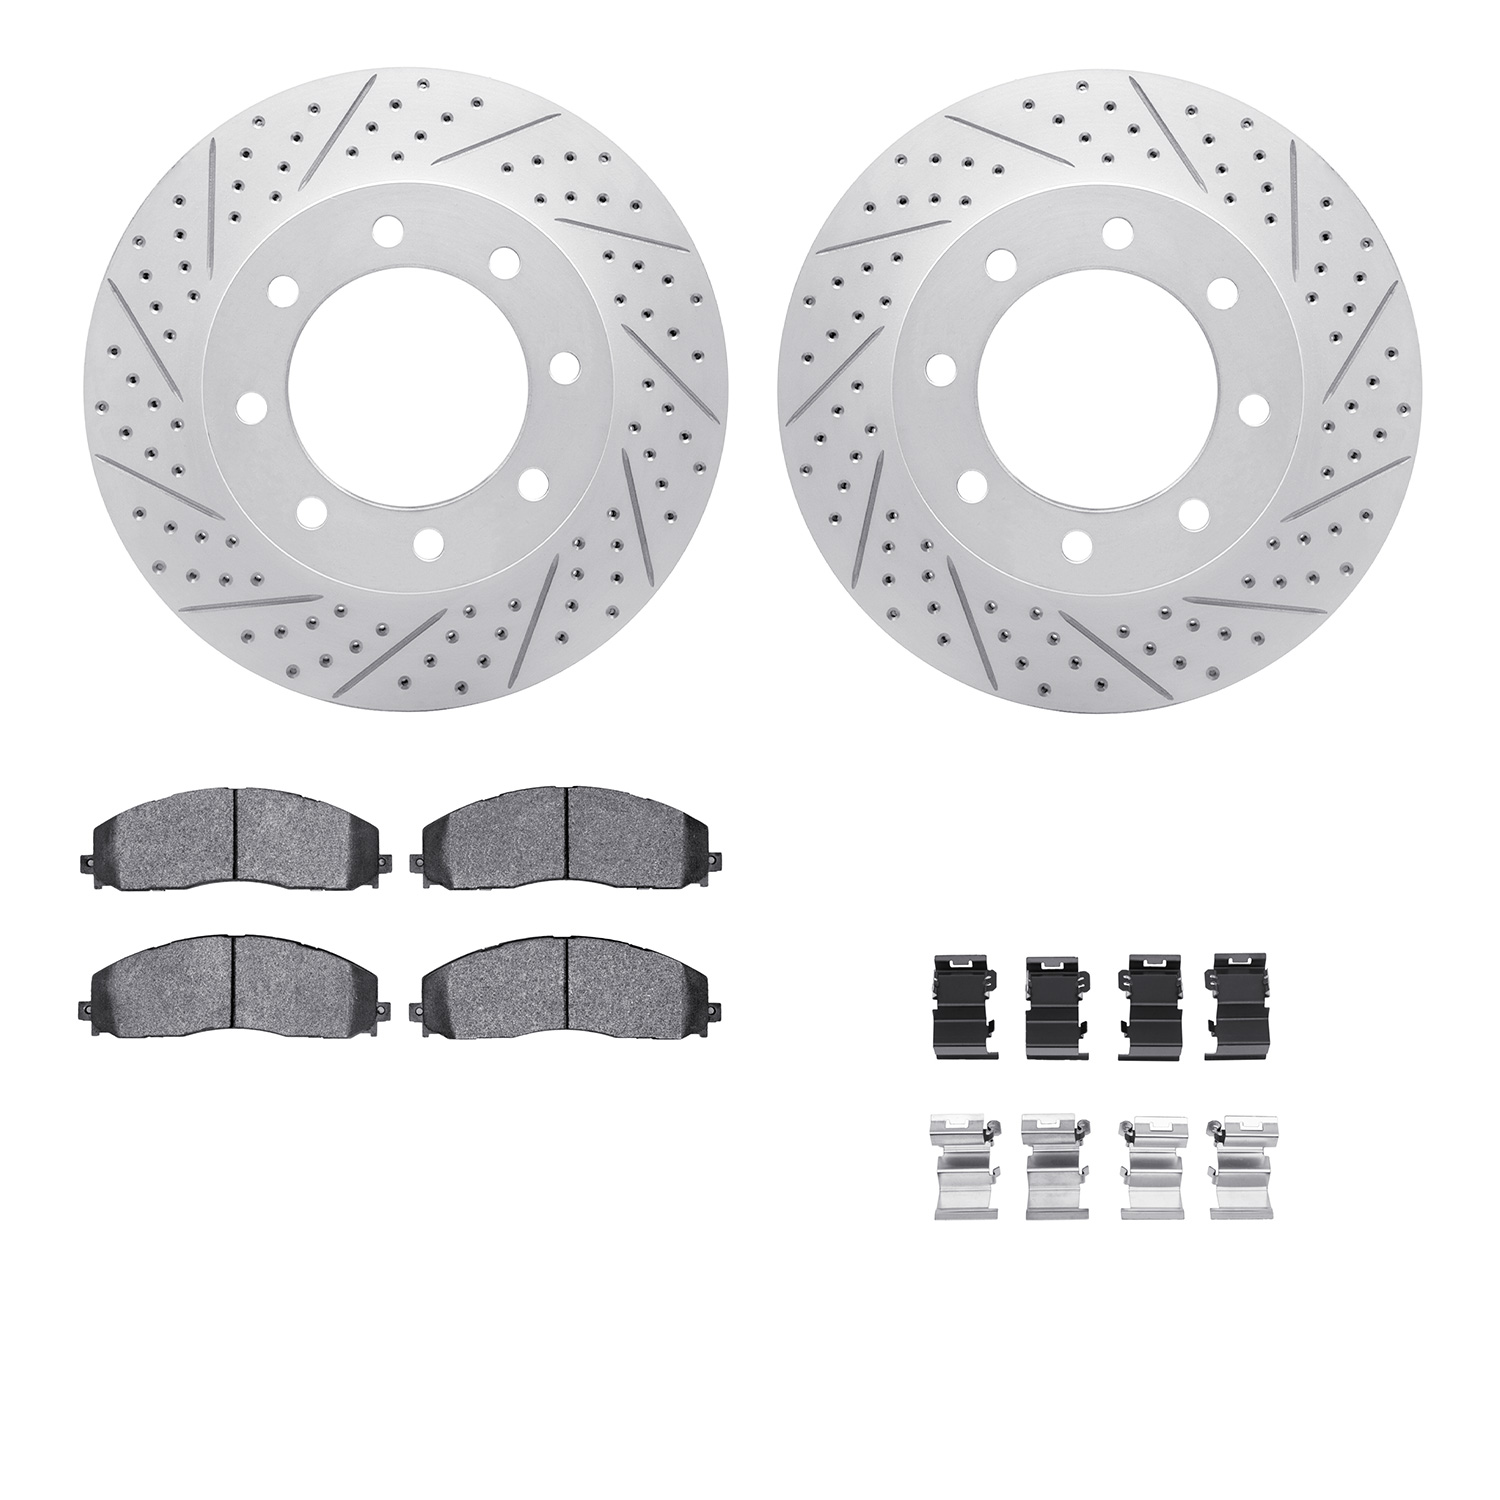 2212-99187 Geoperformance Drilled/Slotted Rotors w/Heavy-Duty Pads Kit & Hardware, Fits Select Ford/Lincoln/Mercury/Mazda, Posit